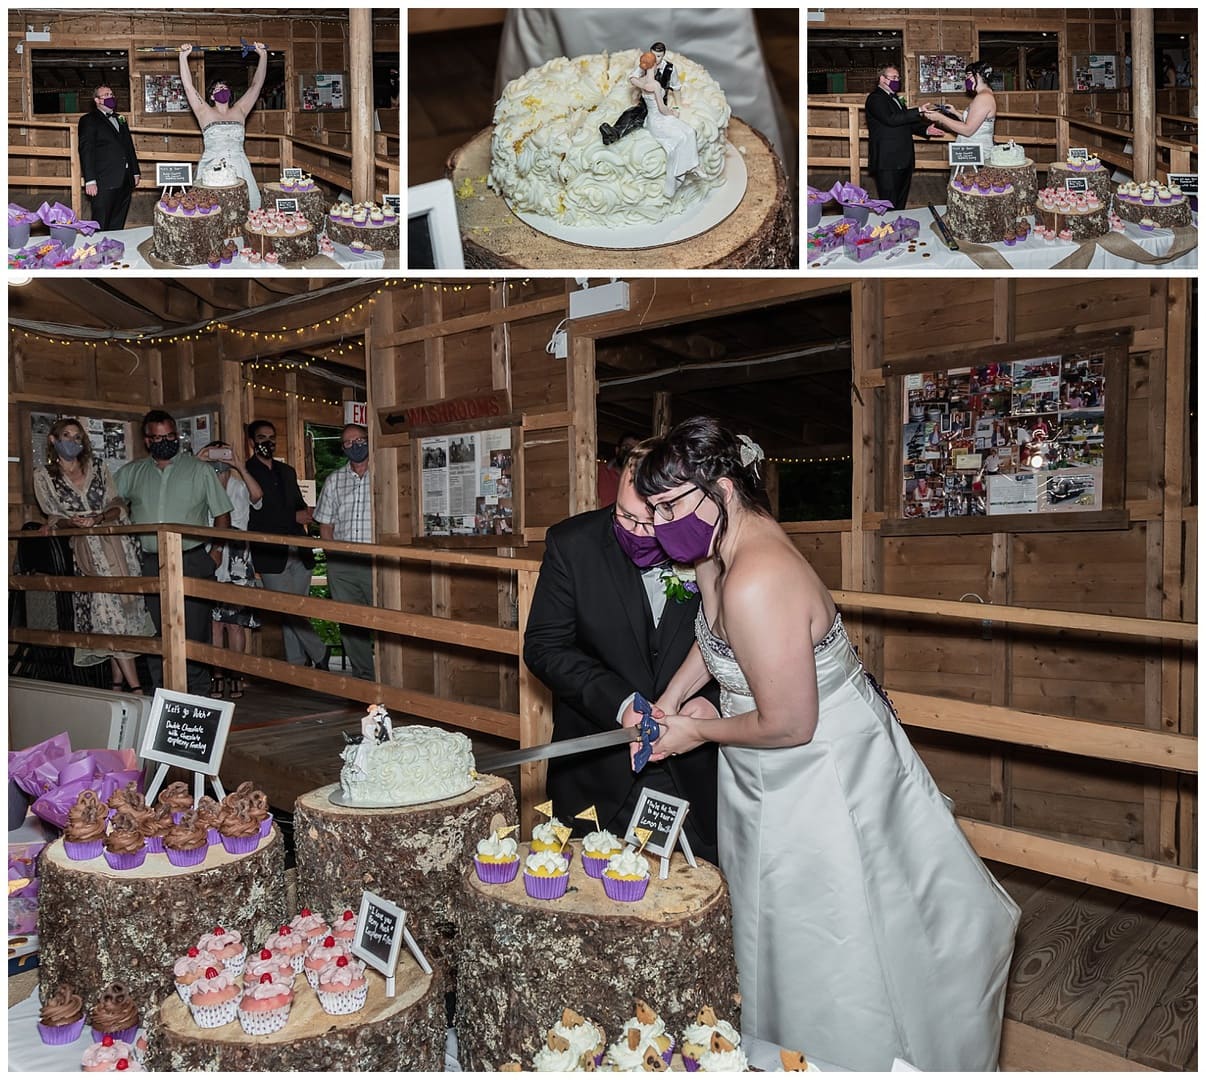 The bride and groom cut their cake with a huge sword during their wedding reception at the Hubbard's Barn in NS.